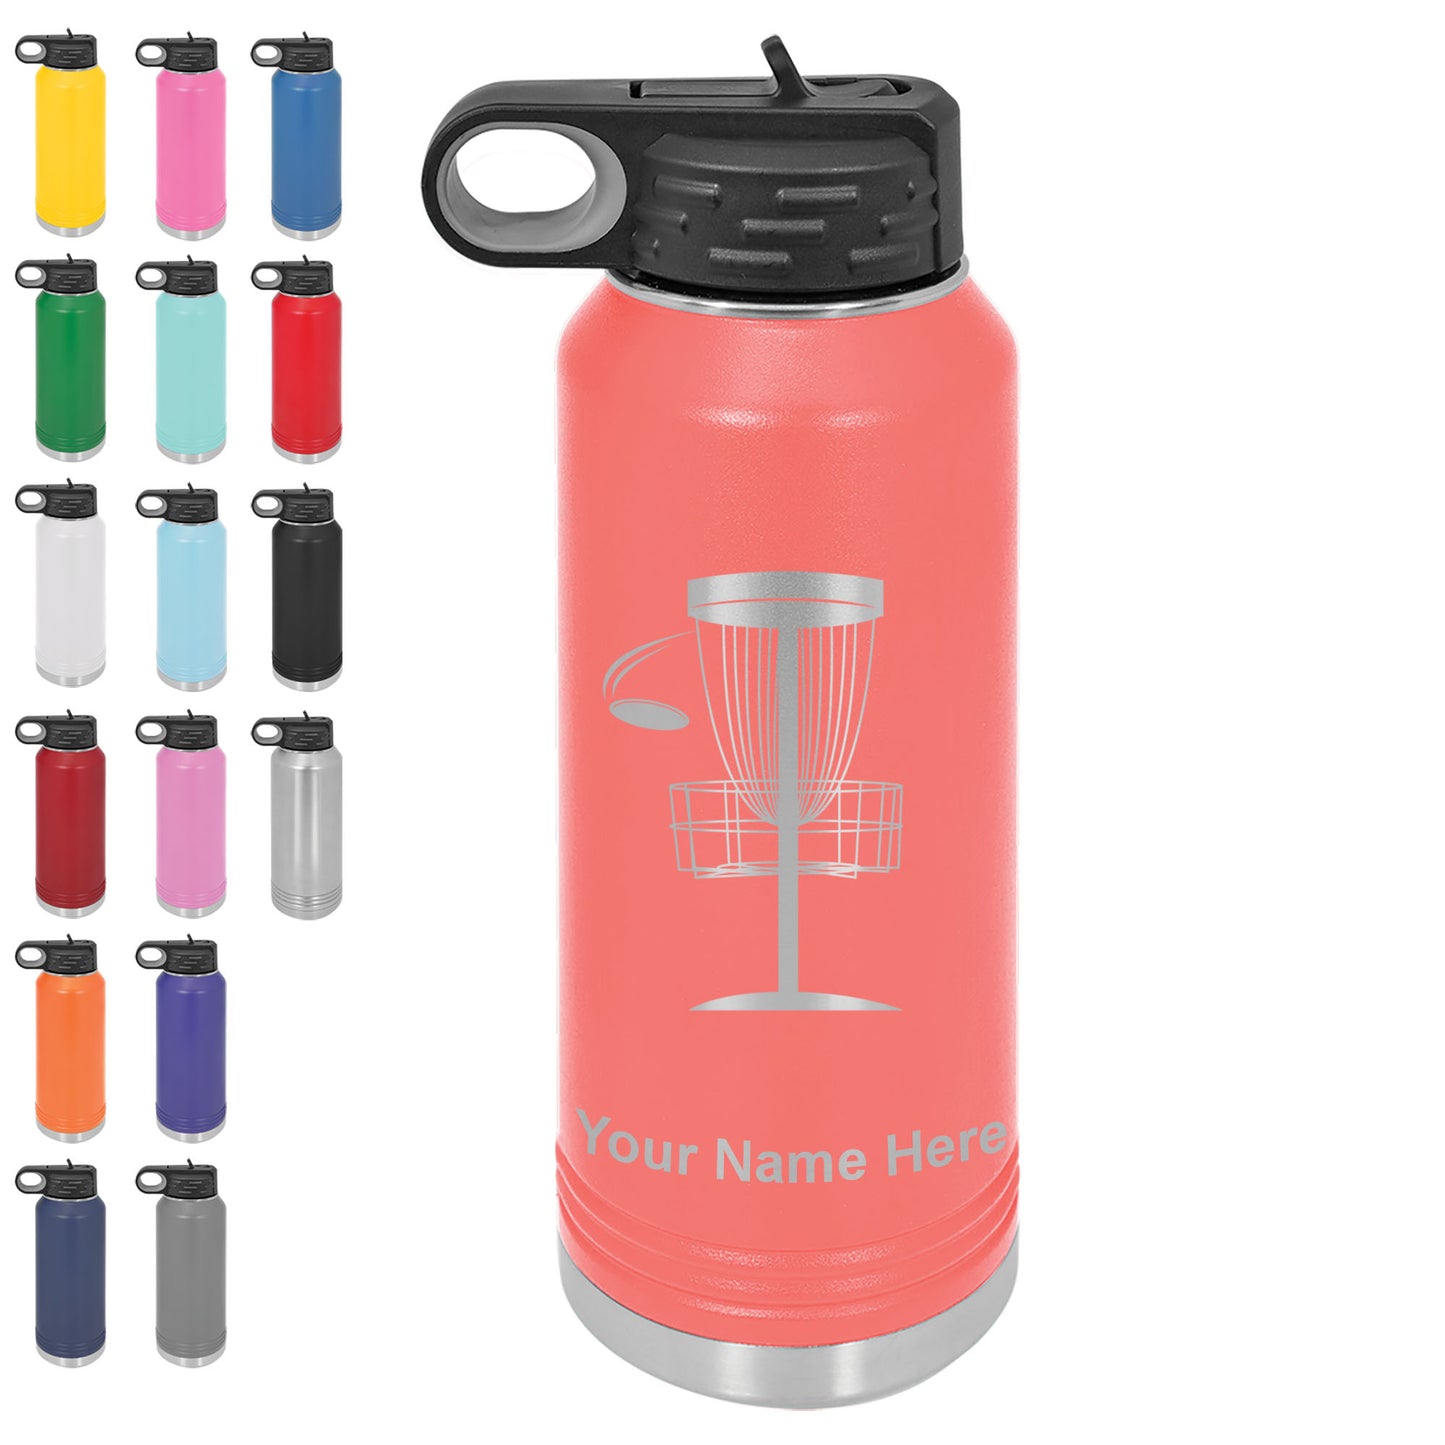 LaserGram 32oz Double Wall Flip Top Water Bottle with Straw, Disc Golf, Personalized Engraving Included